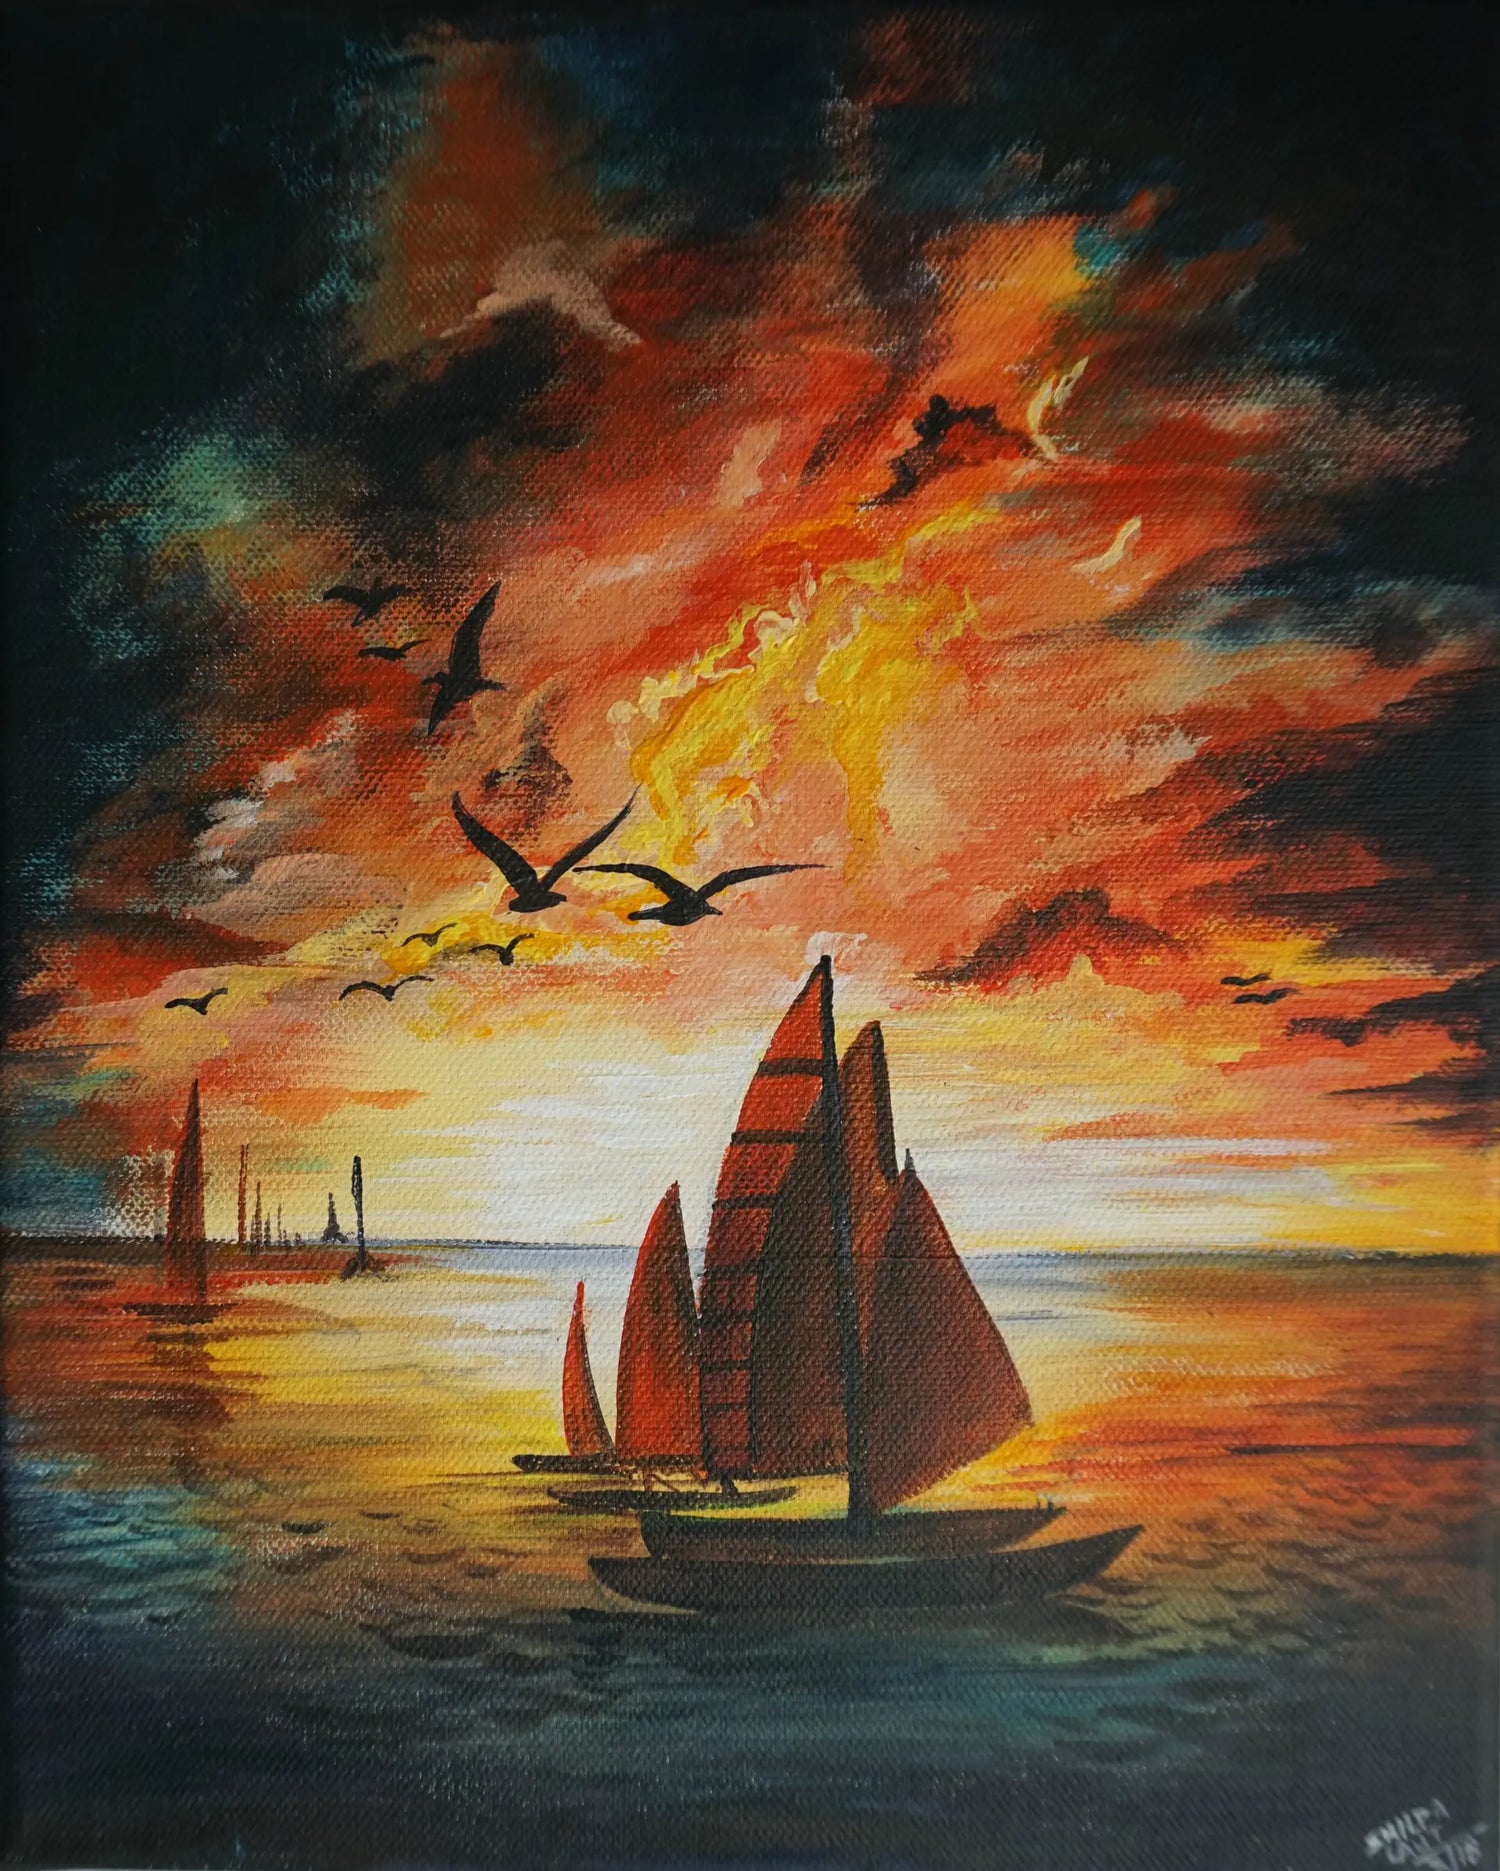 Experience the Magic of Sunsets: Step-by-Step Guide to Painting Two Beautiful Acrylic Sunset Paintings